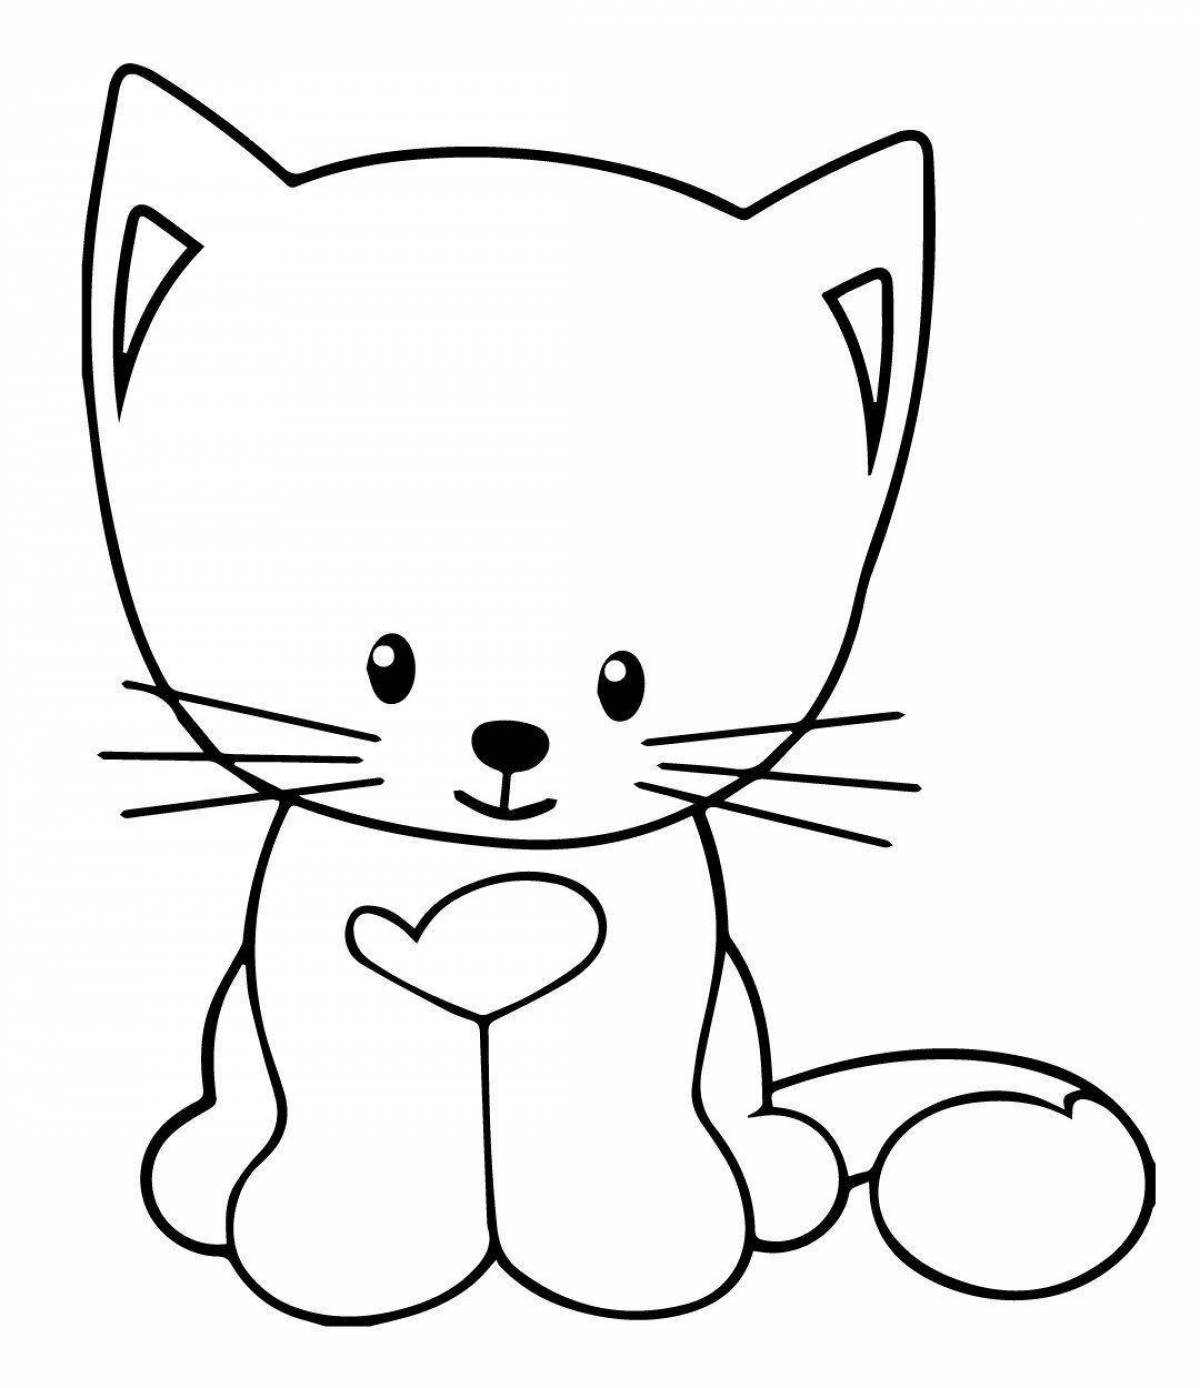 Cute cat coloring pages for kids